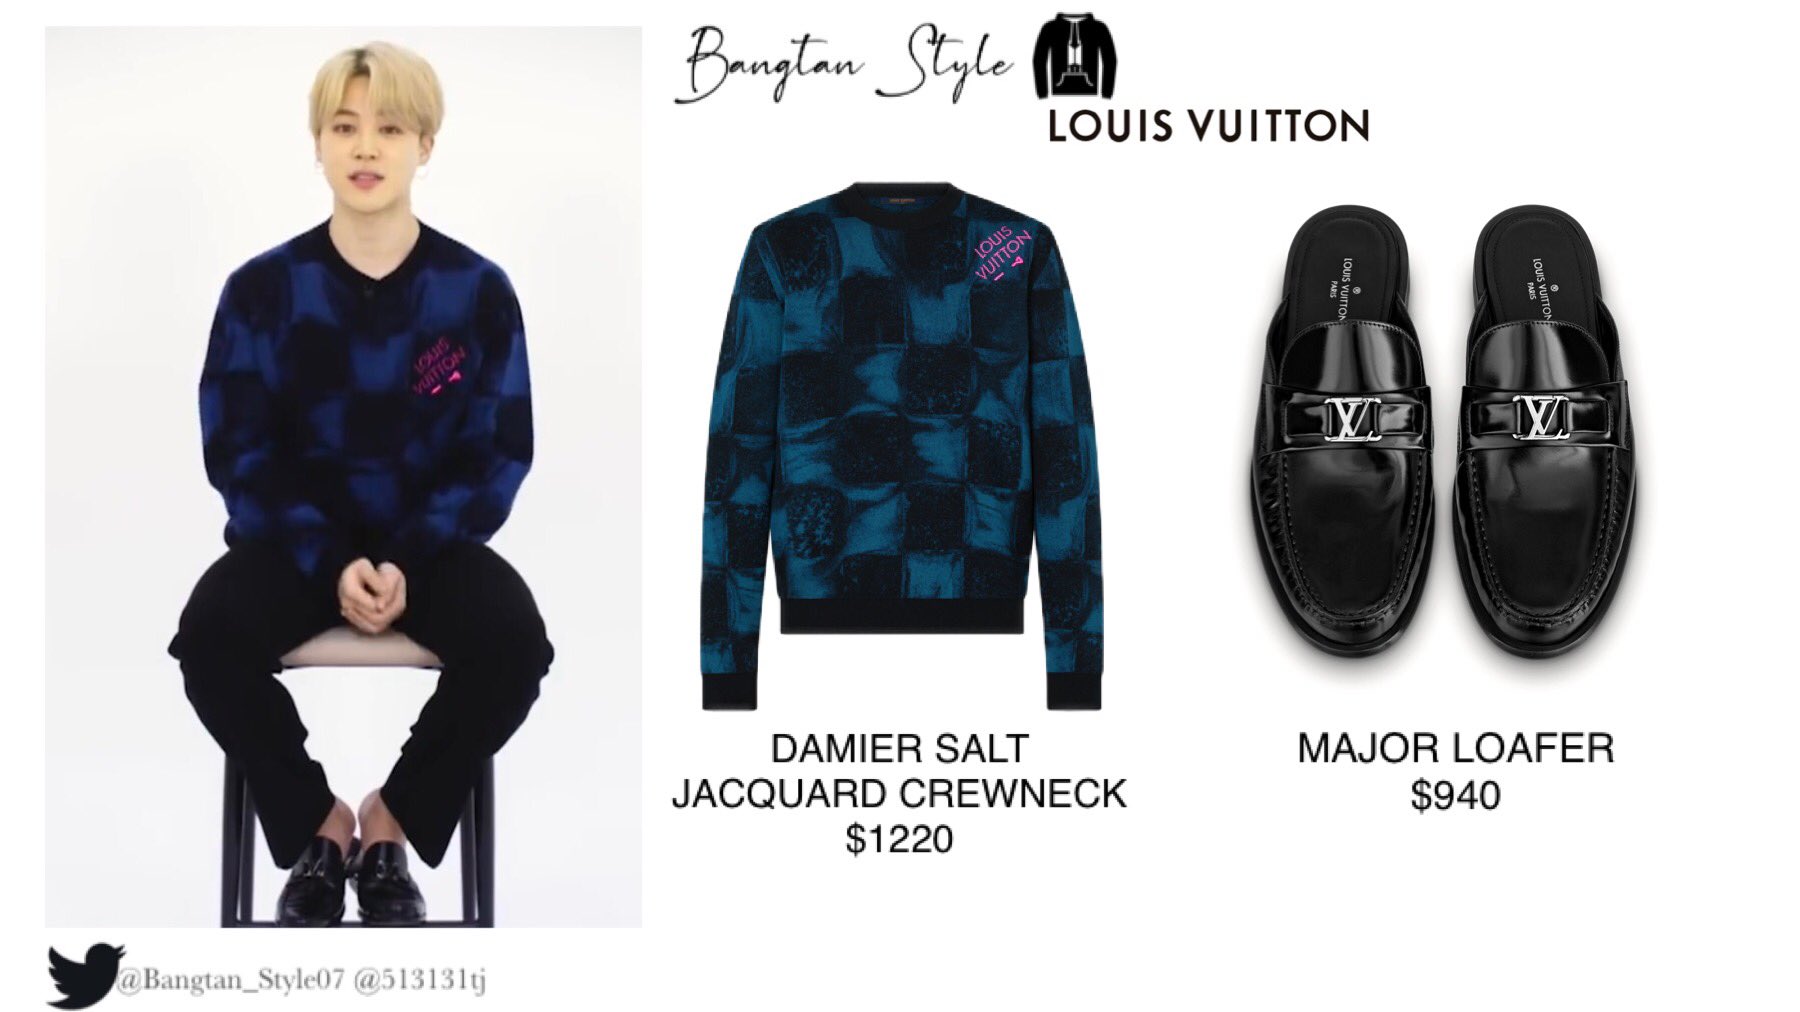 Bangtan Style⁷ (slow) on X: BTS at THE TONIGHT SHOW D1 Jungkook